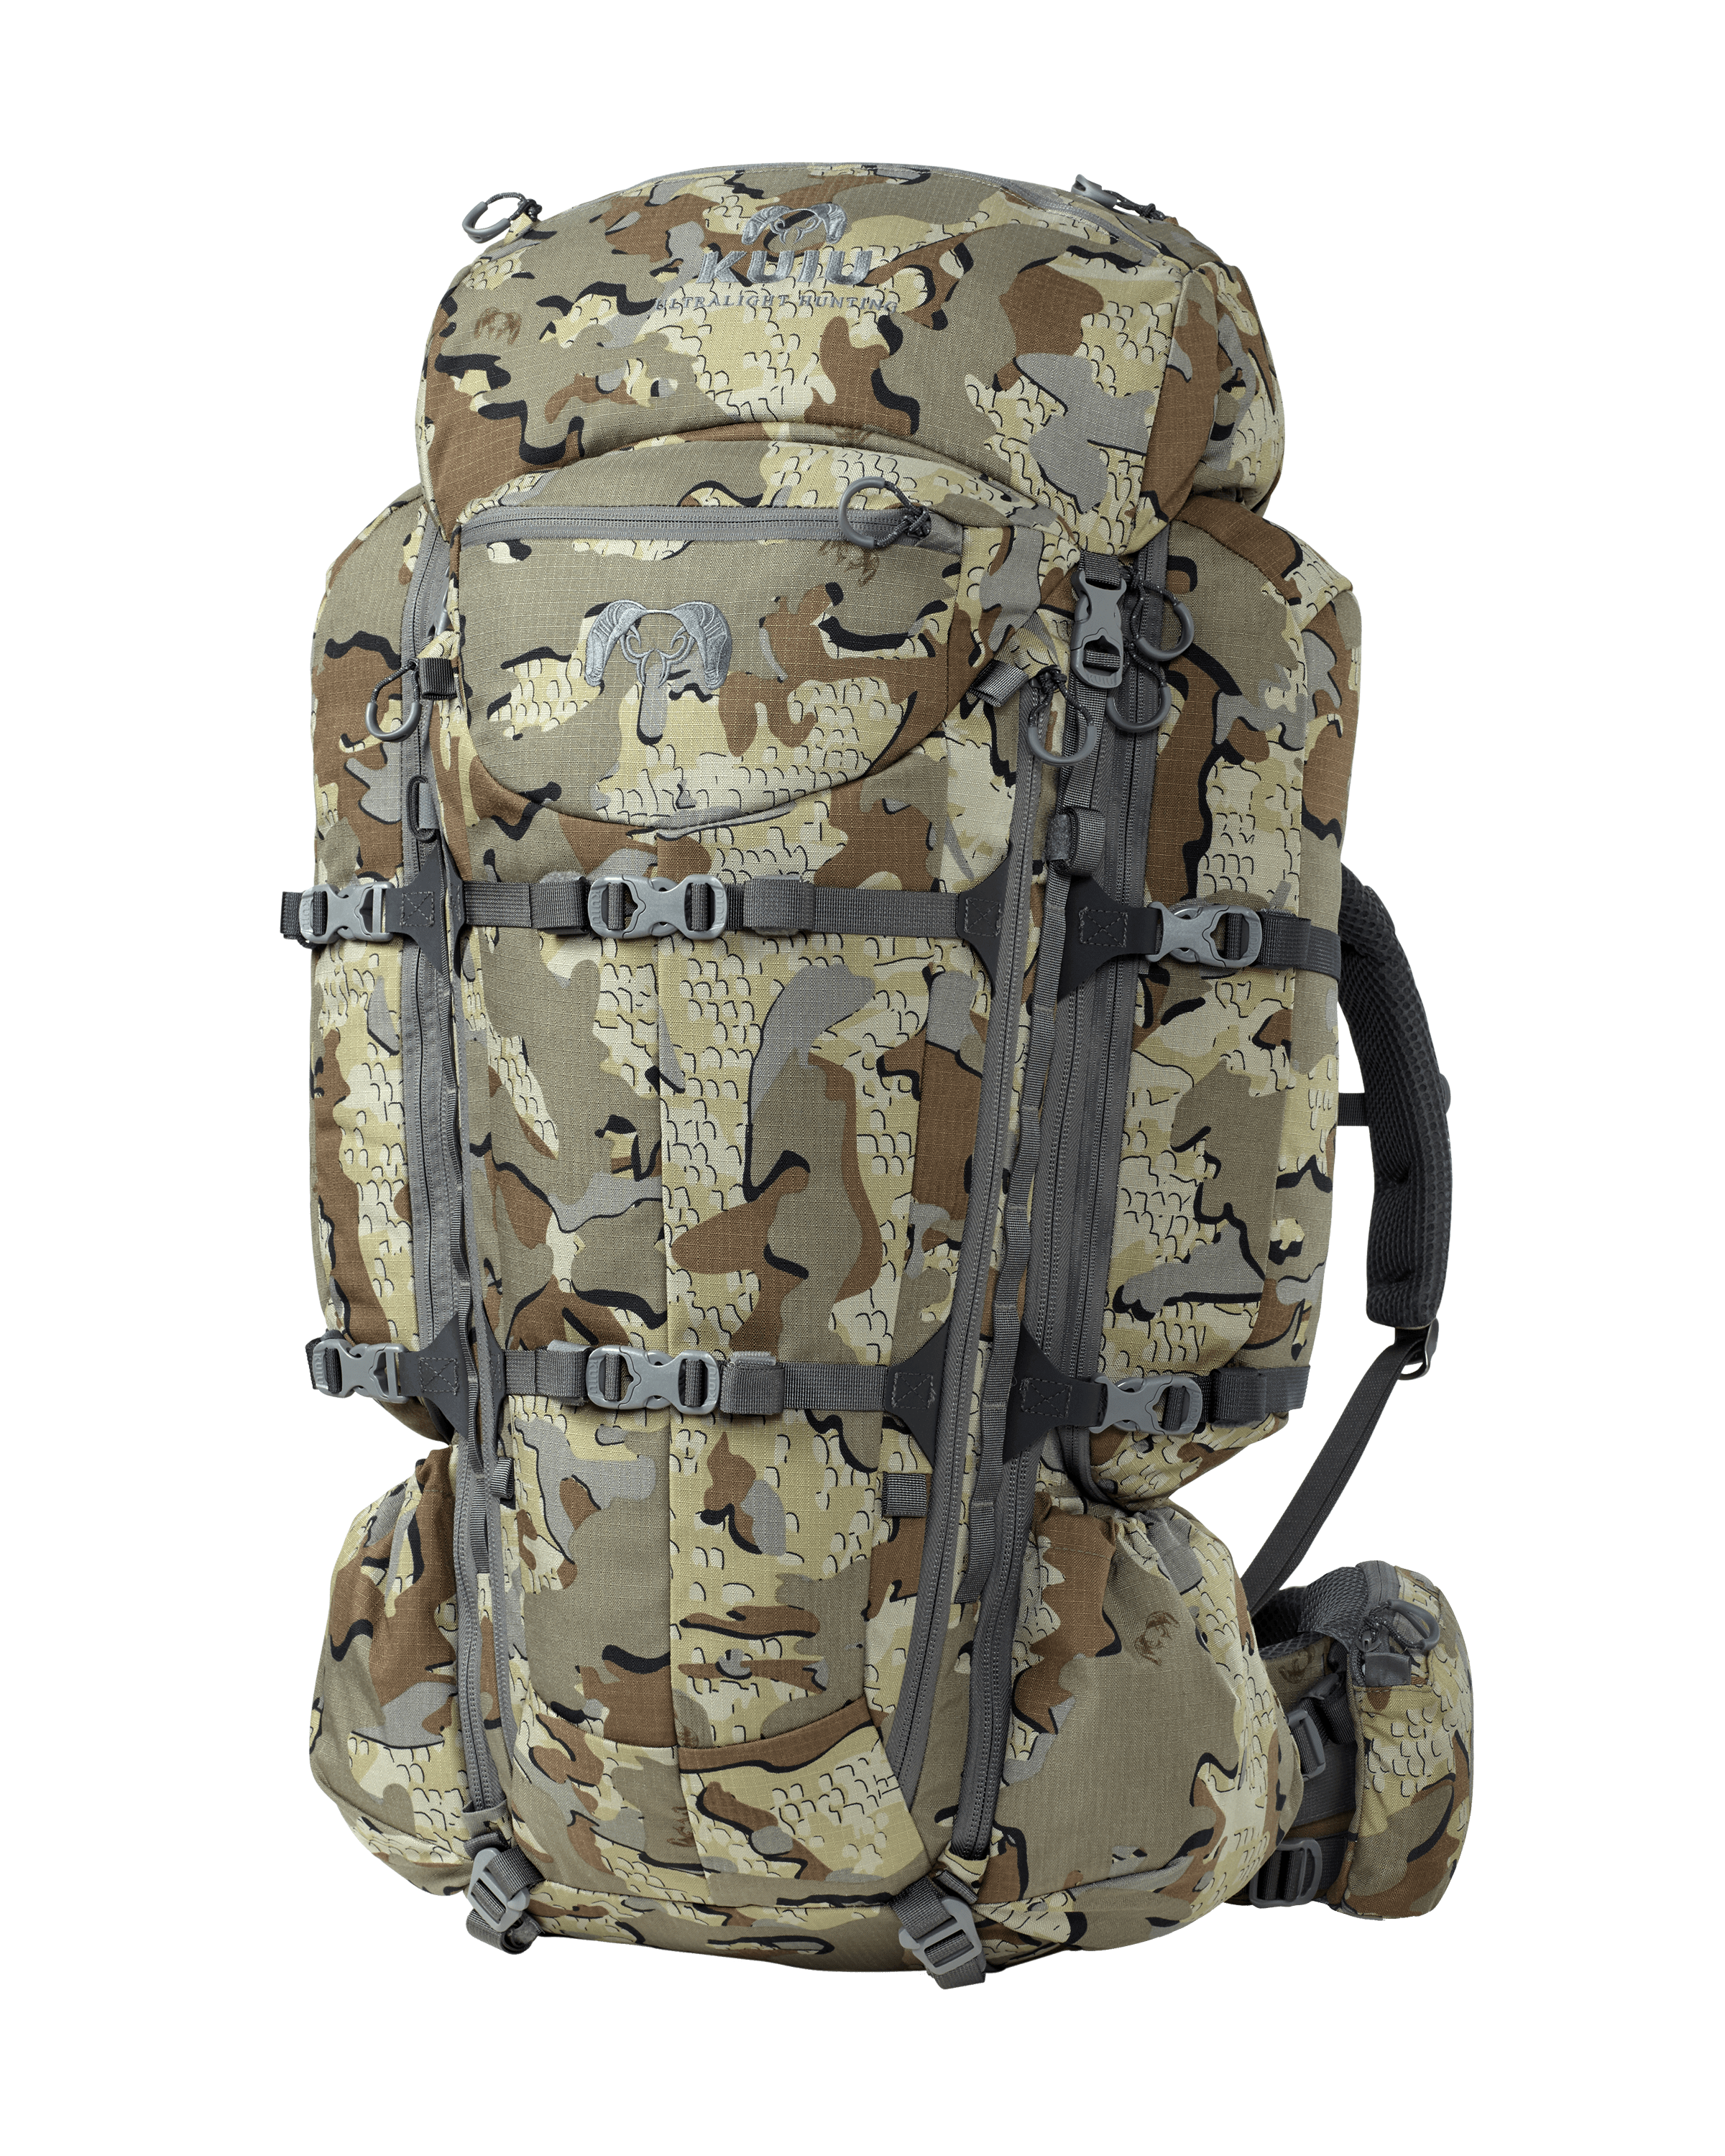 KUIU PRO 6000 Pack in Valo